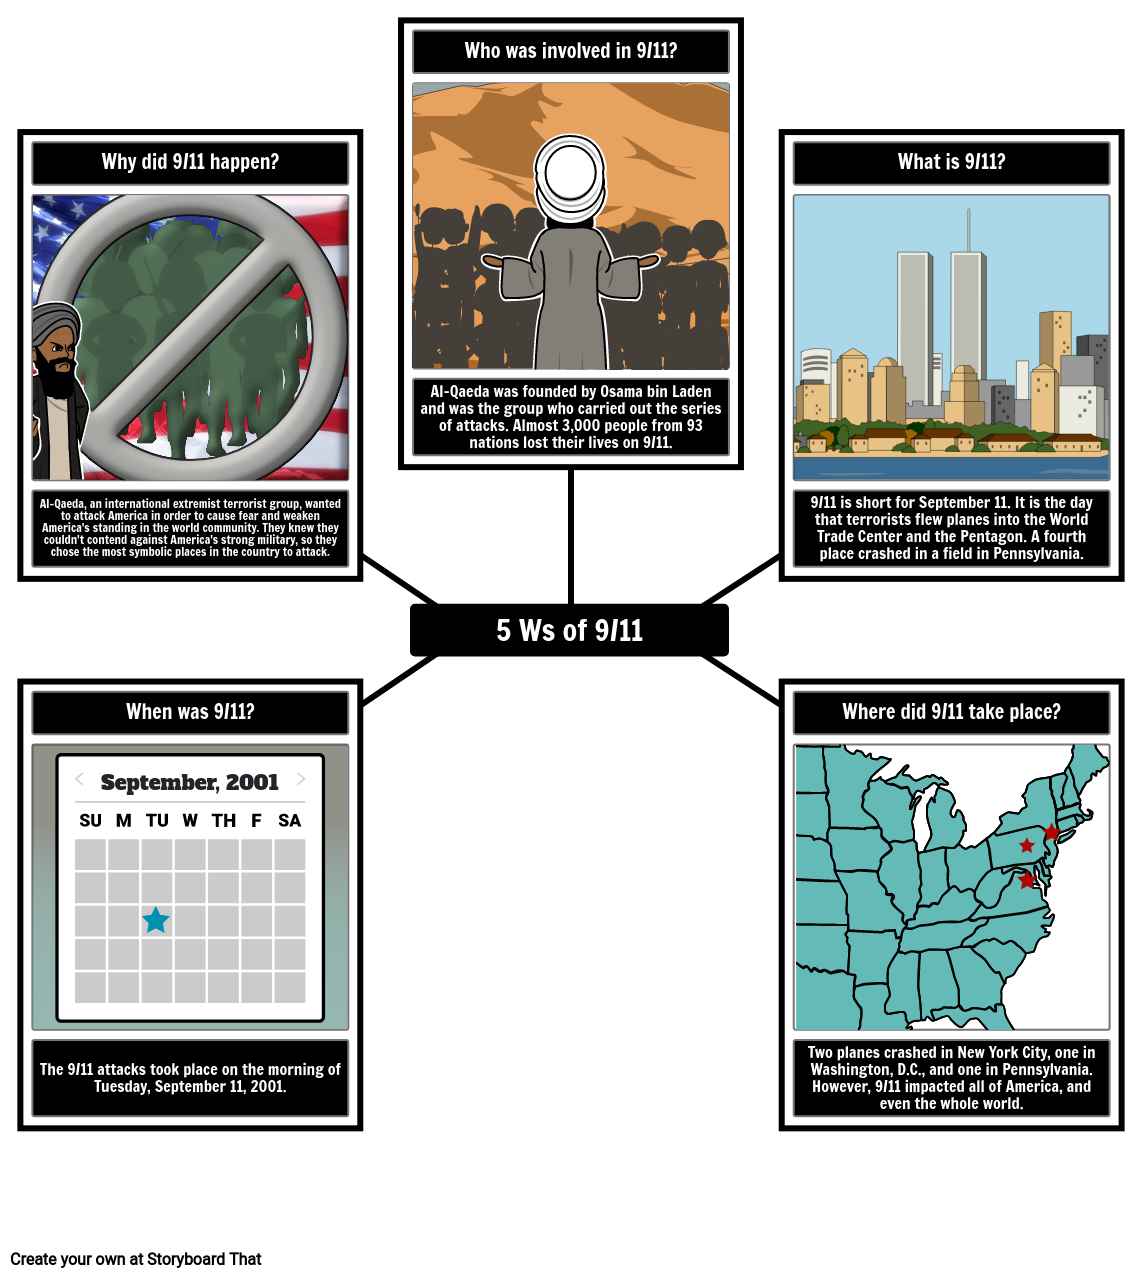 The 5 Ws of 9/11 Spider Map